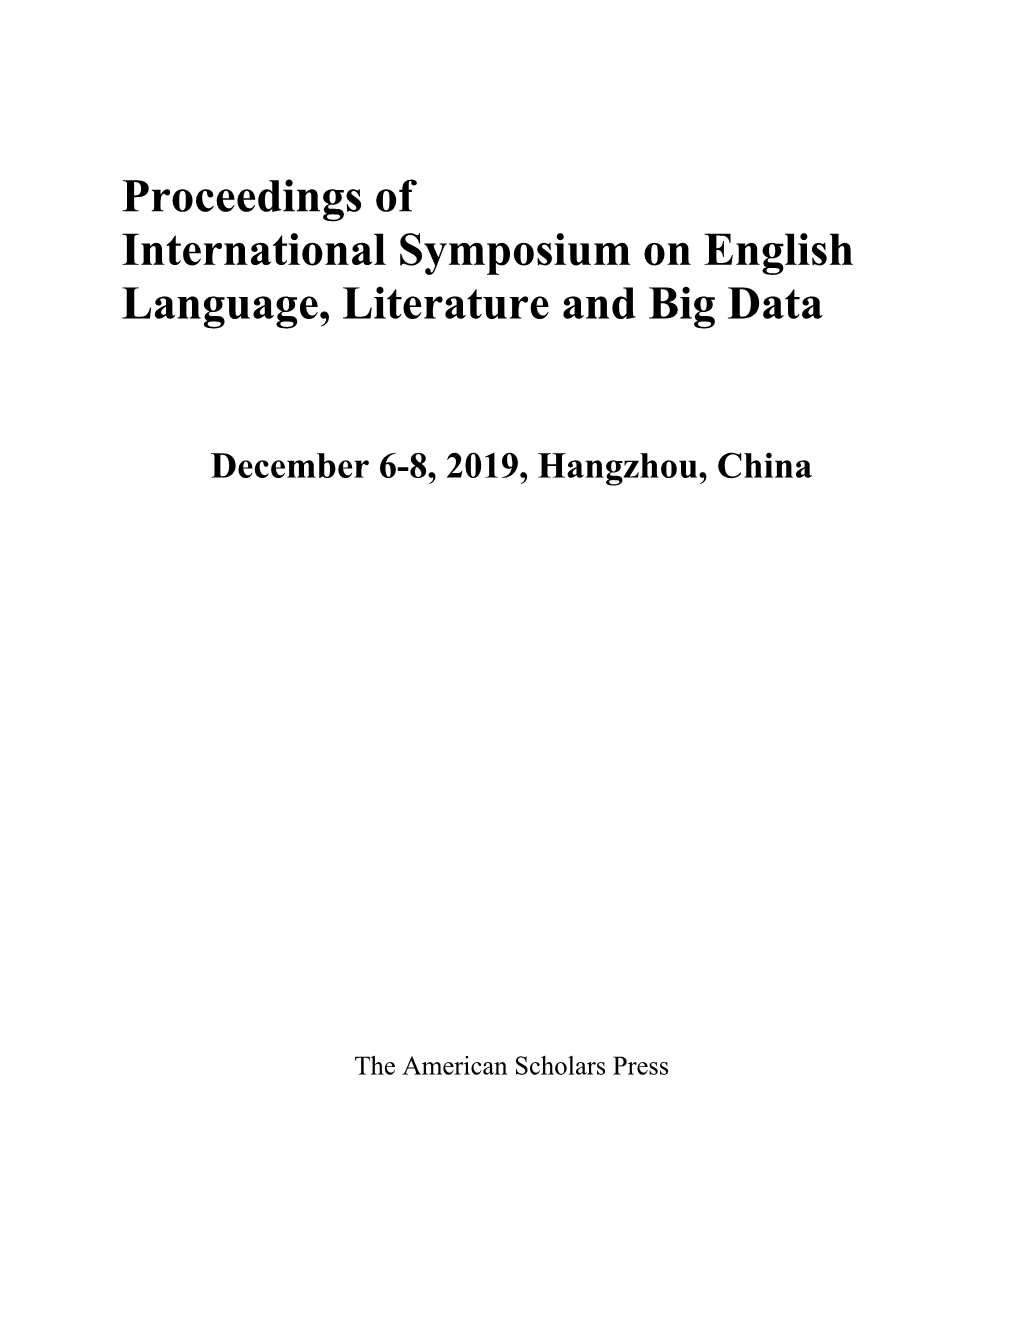 Conference on Chinese Linguistics (NACCL-20) 2008 Volume 1, (Pp